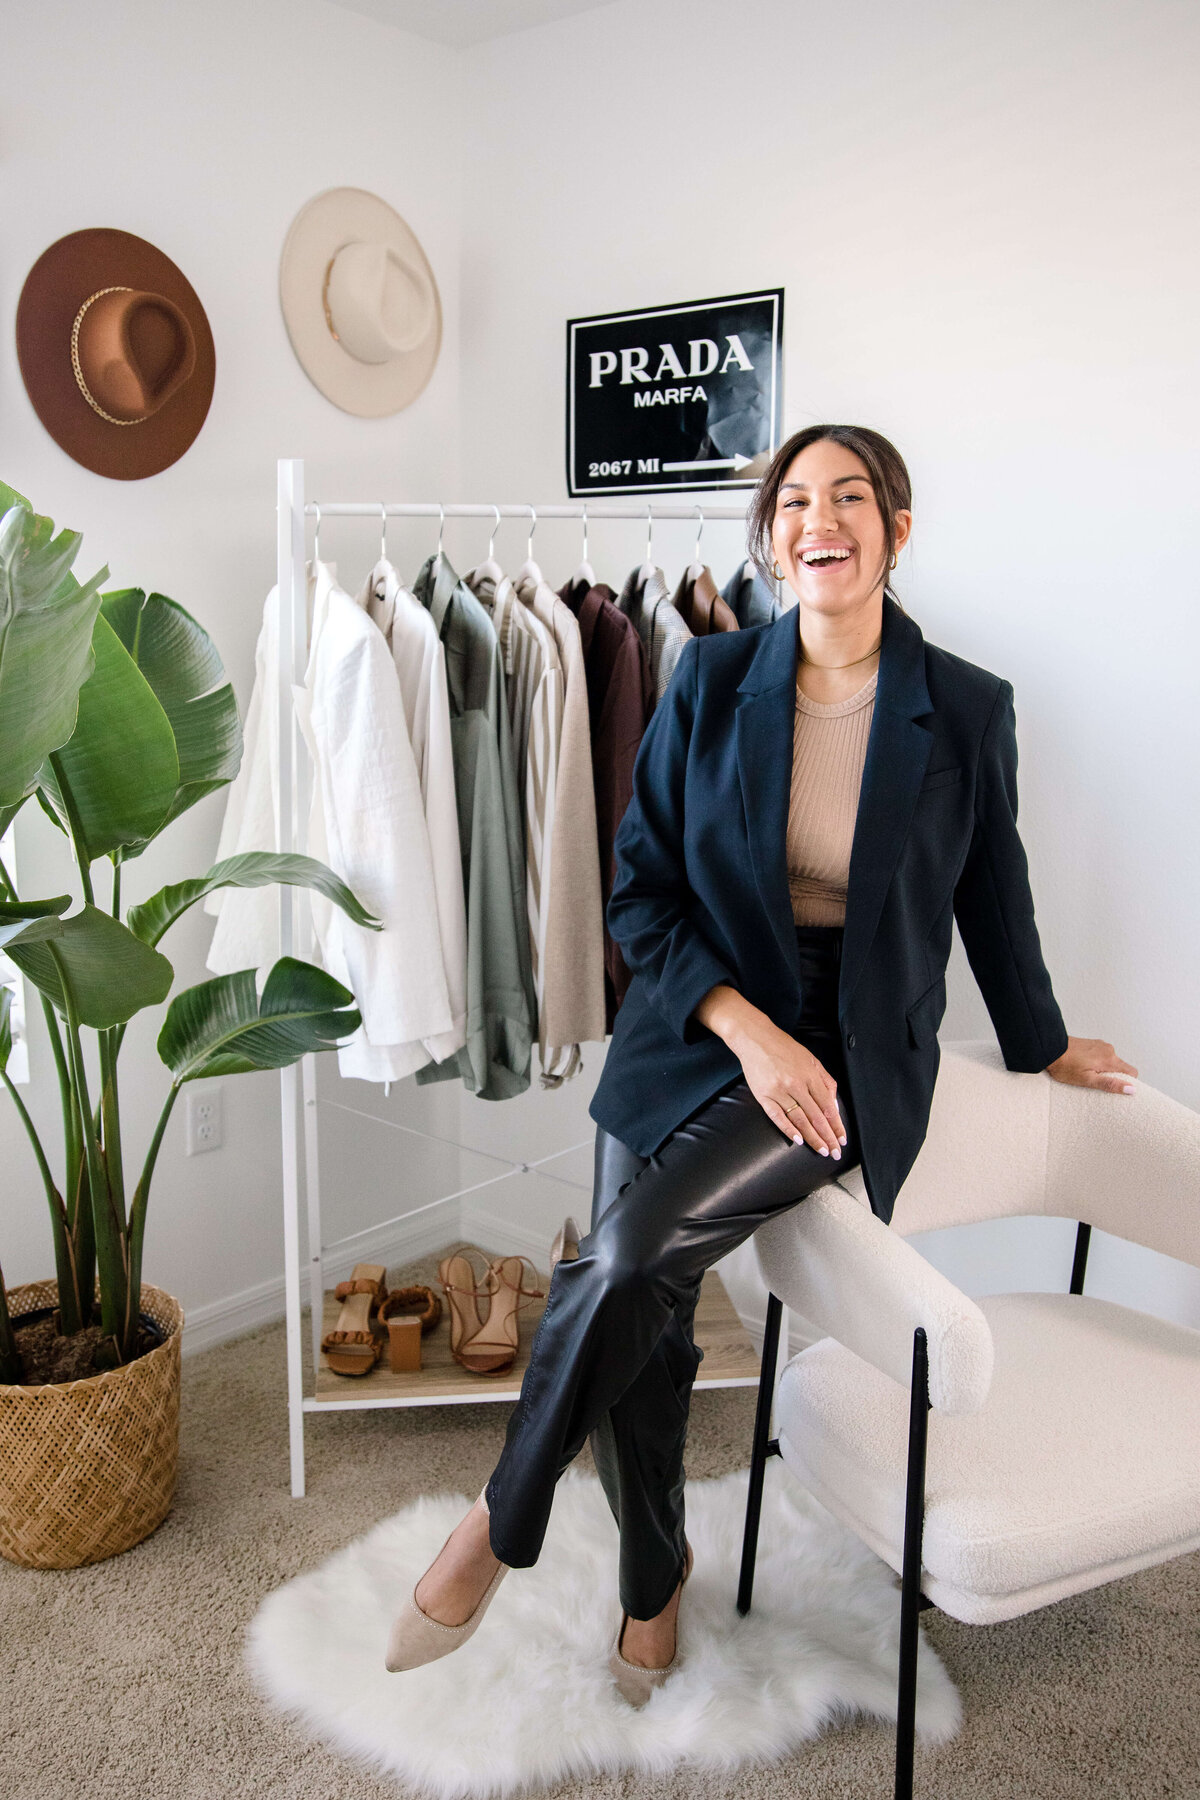 commercial photographers captures clothing brand photoshoot ideas with personal stylist posing in a studio session with woman posing on a chair in front of a sample closet for a client